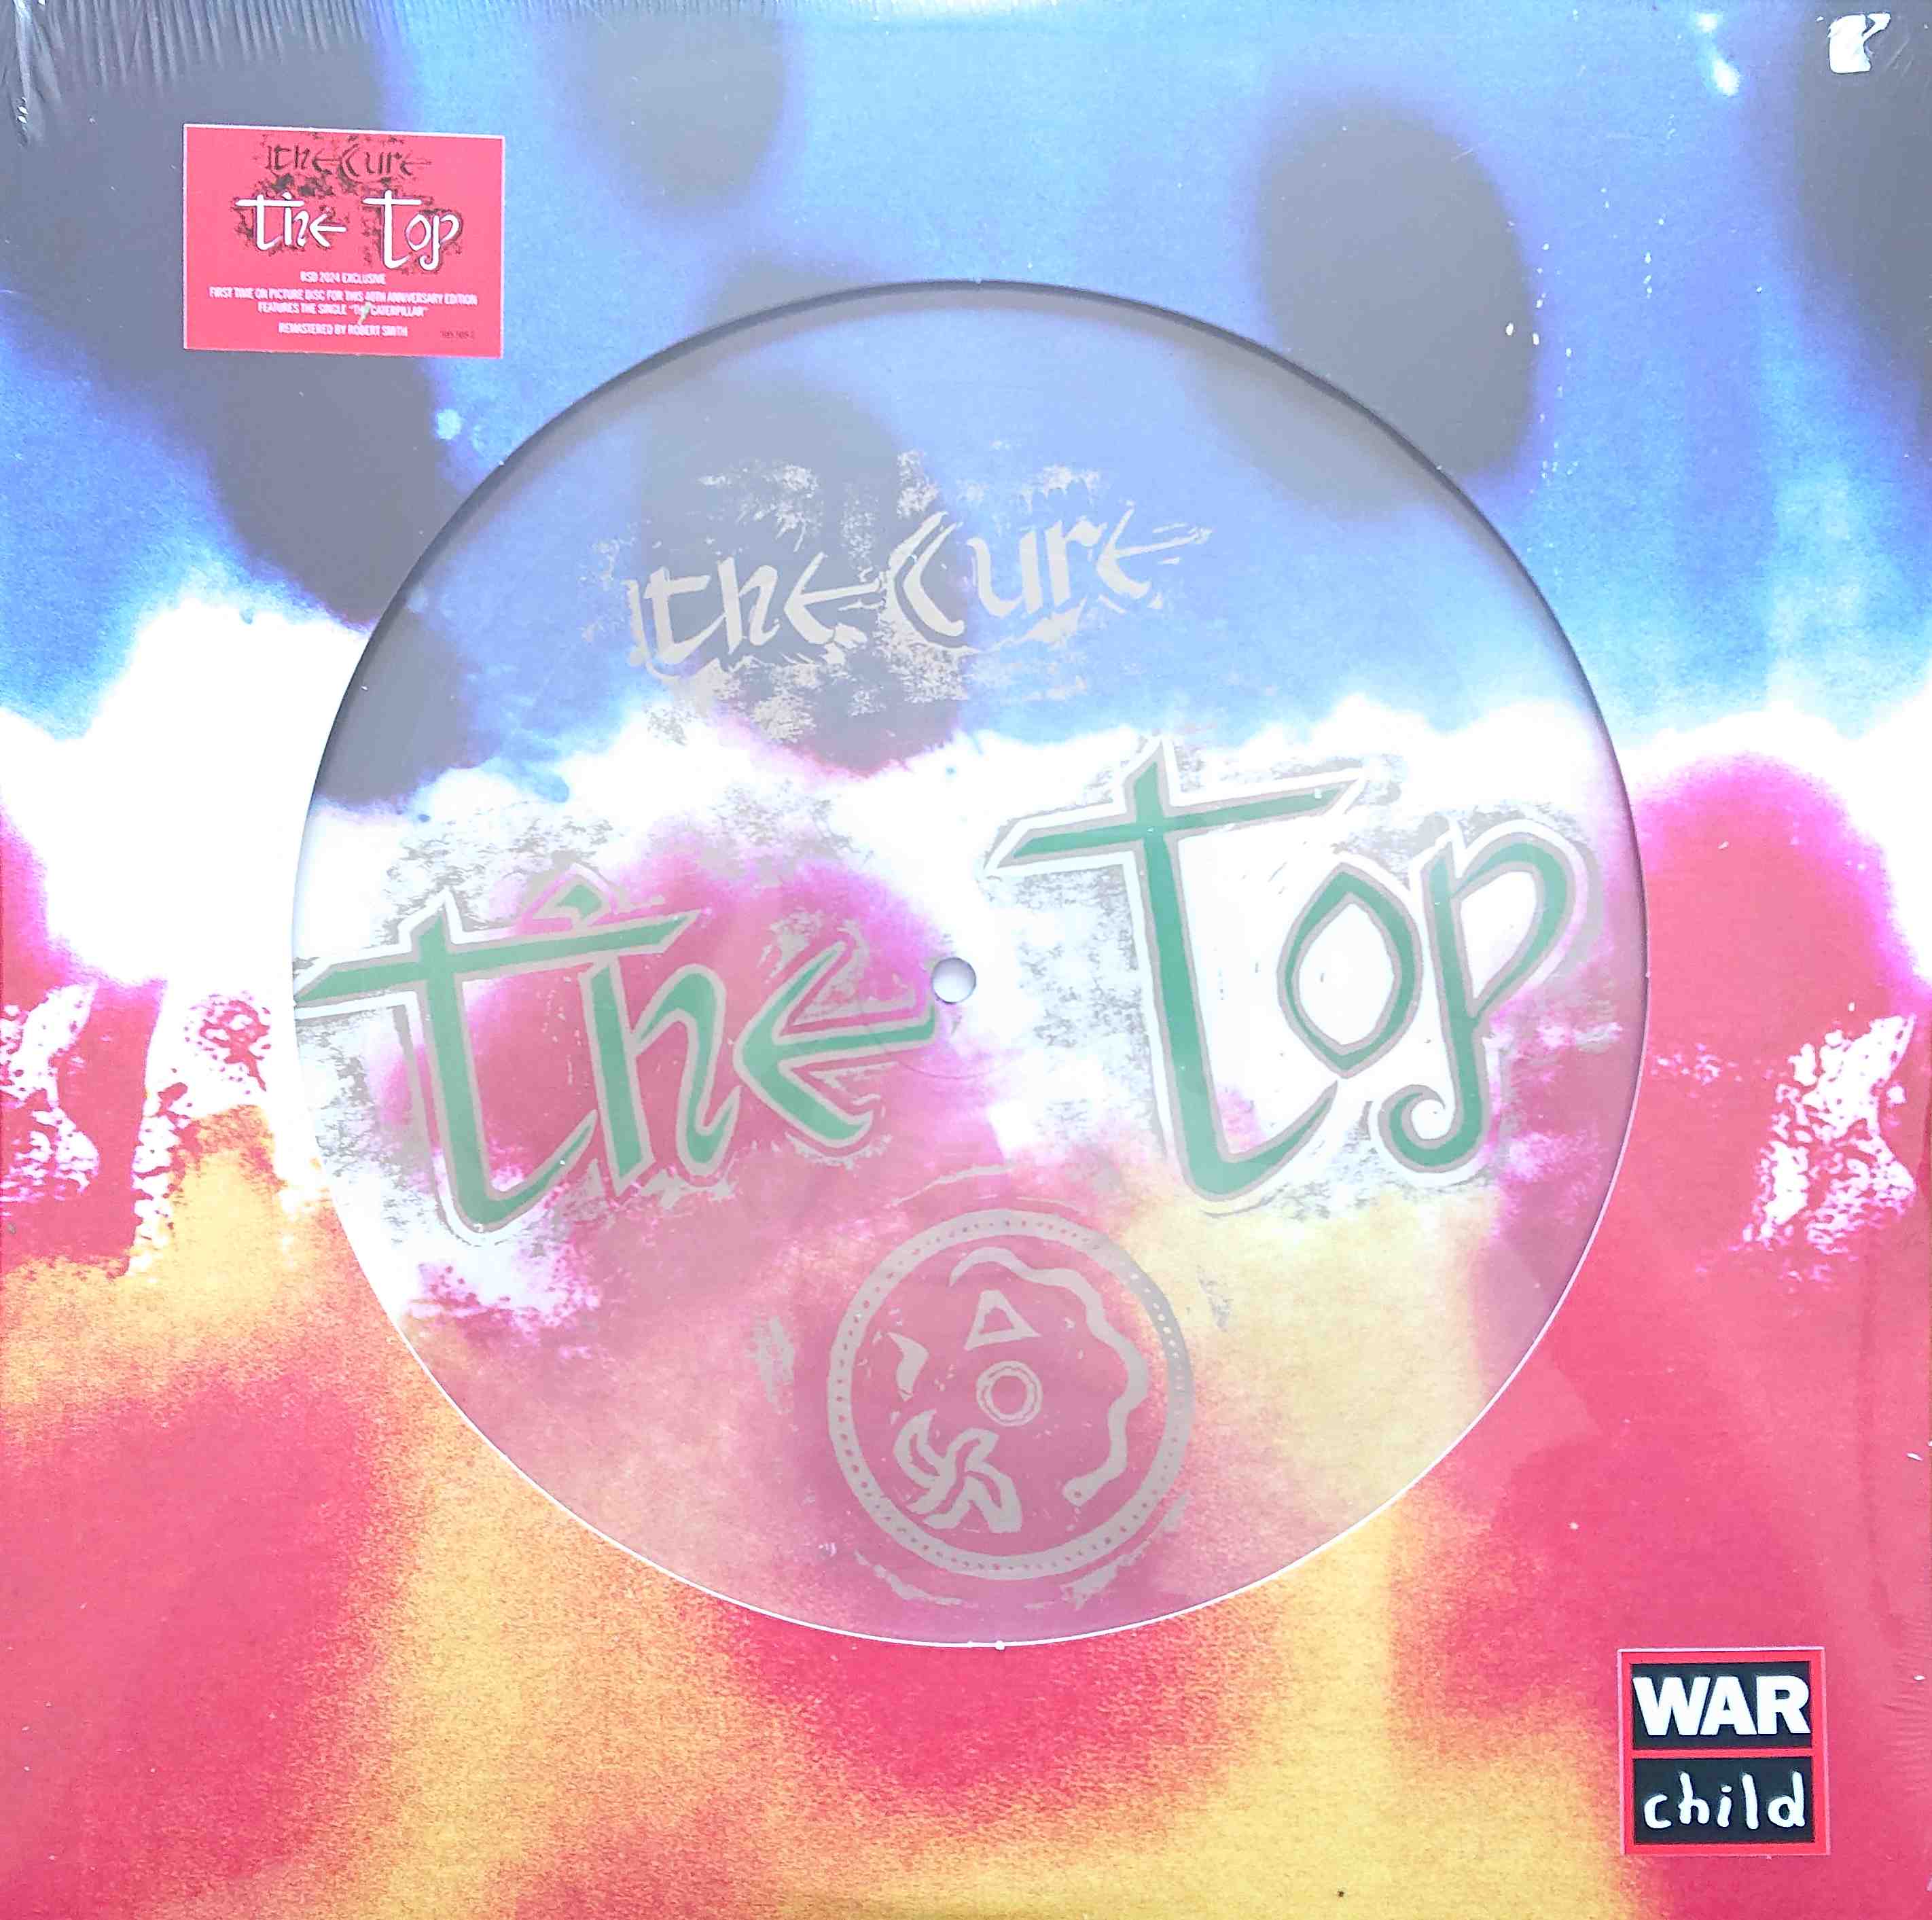 Picture of The top by artist The Cure 